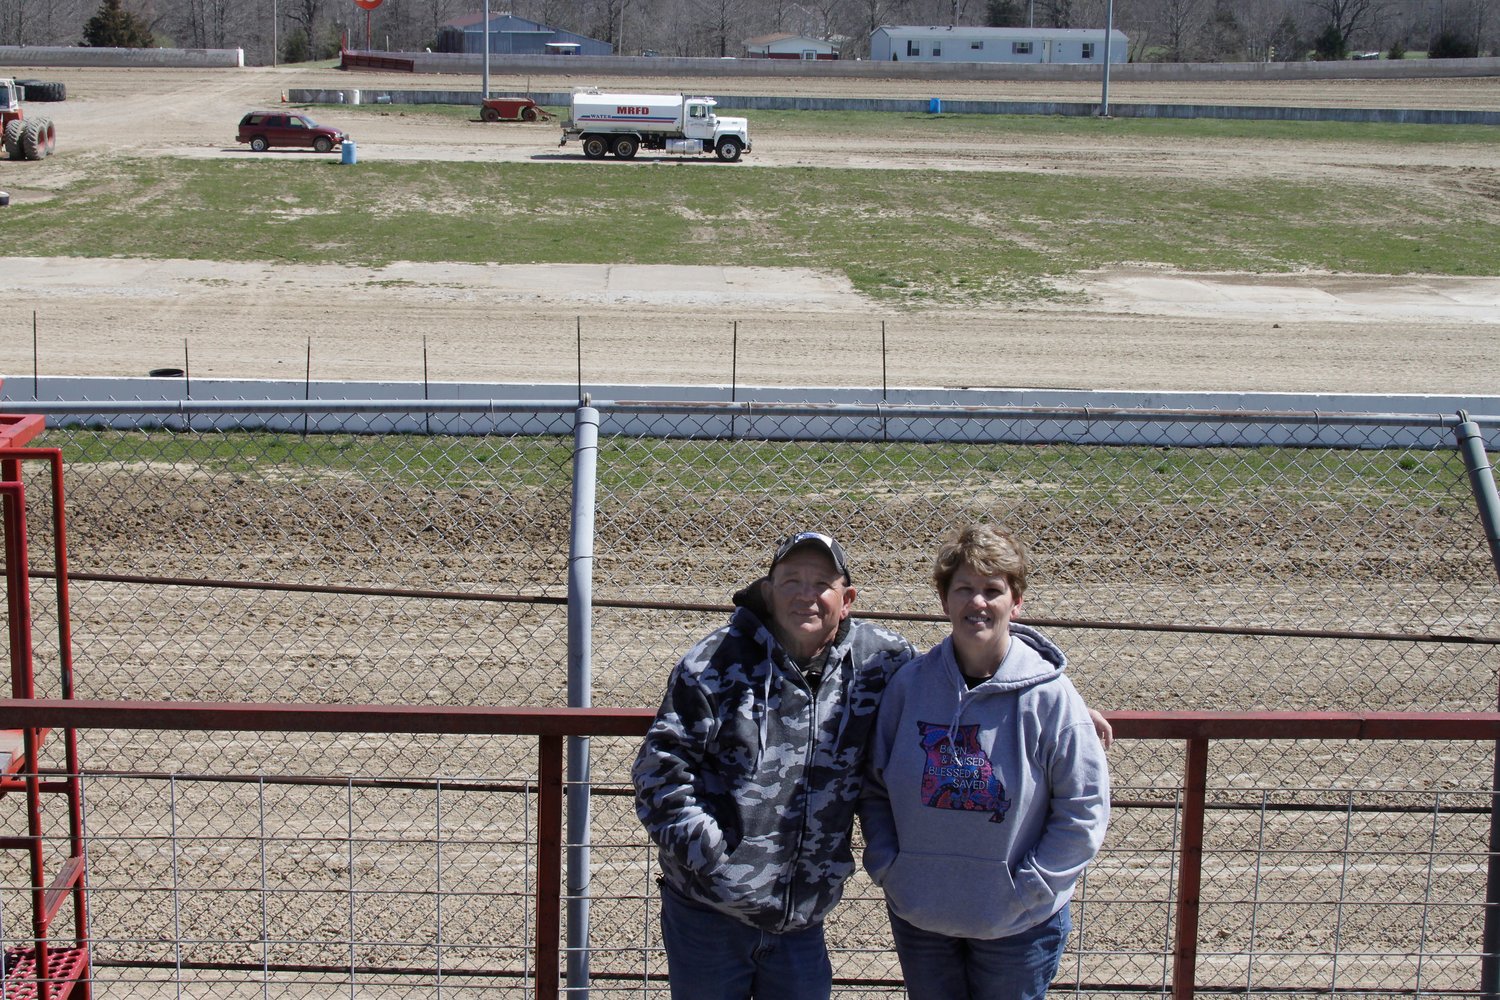 Jim and Tammy Lieurance are the new promoters/business managers at Randolph County Raceway in Moberly. The 2021 dirt track series schedule opens Friday, April 2 with five feature classes. Races will now be held on Friday nights instead of Sunday's, weather permitting, with hot laps starting at 6:30 p.m. and races at 7 p.m.